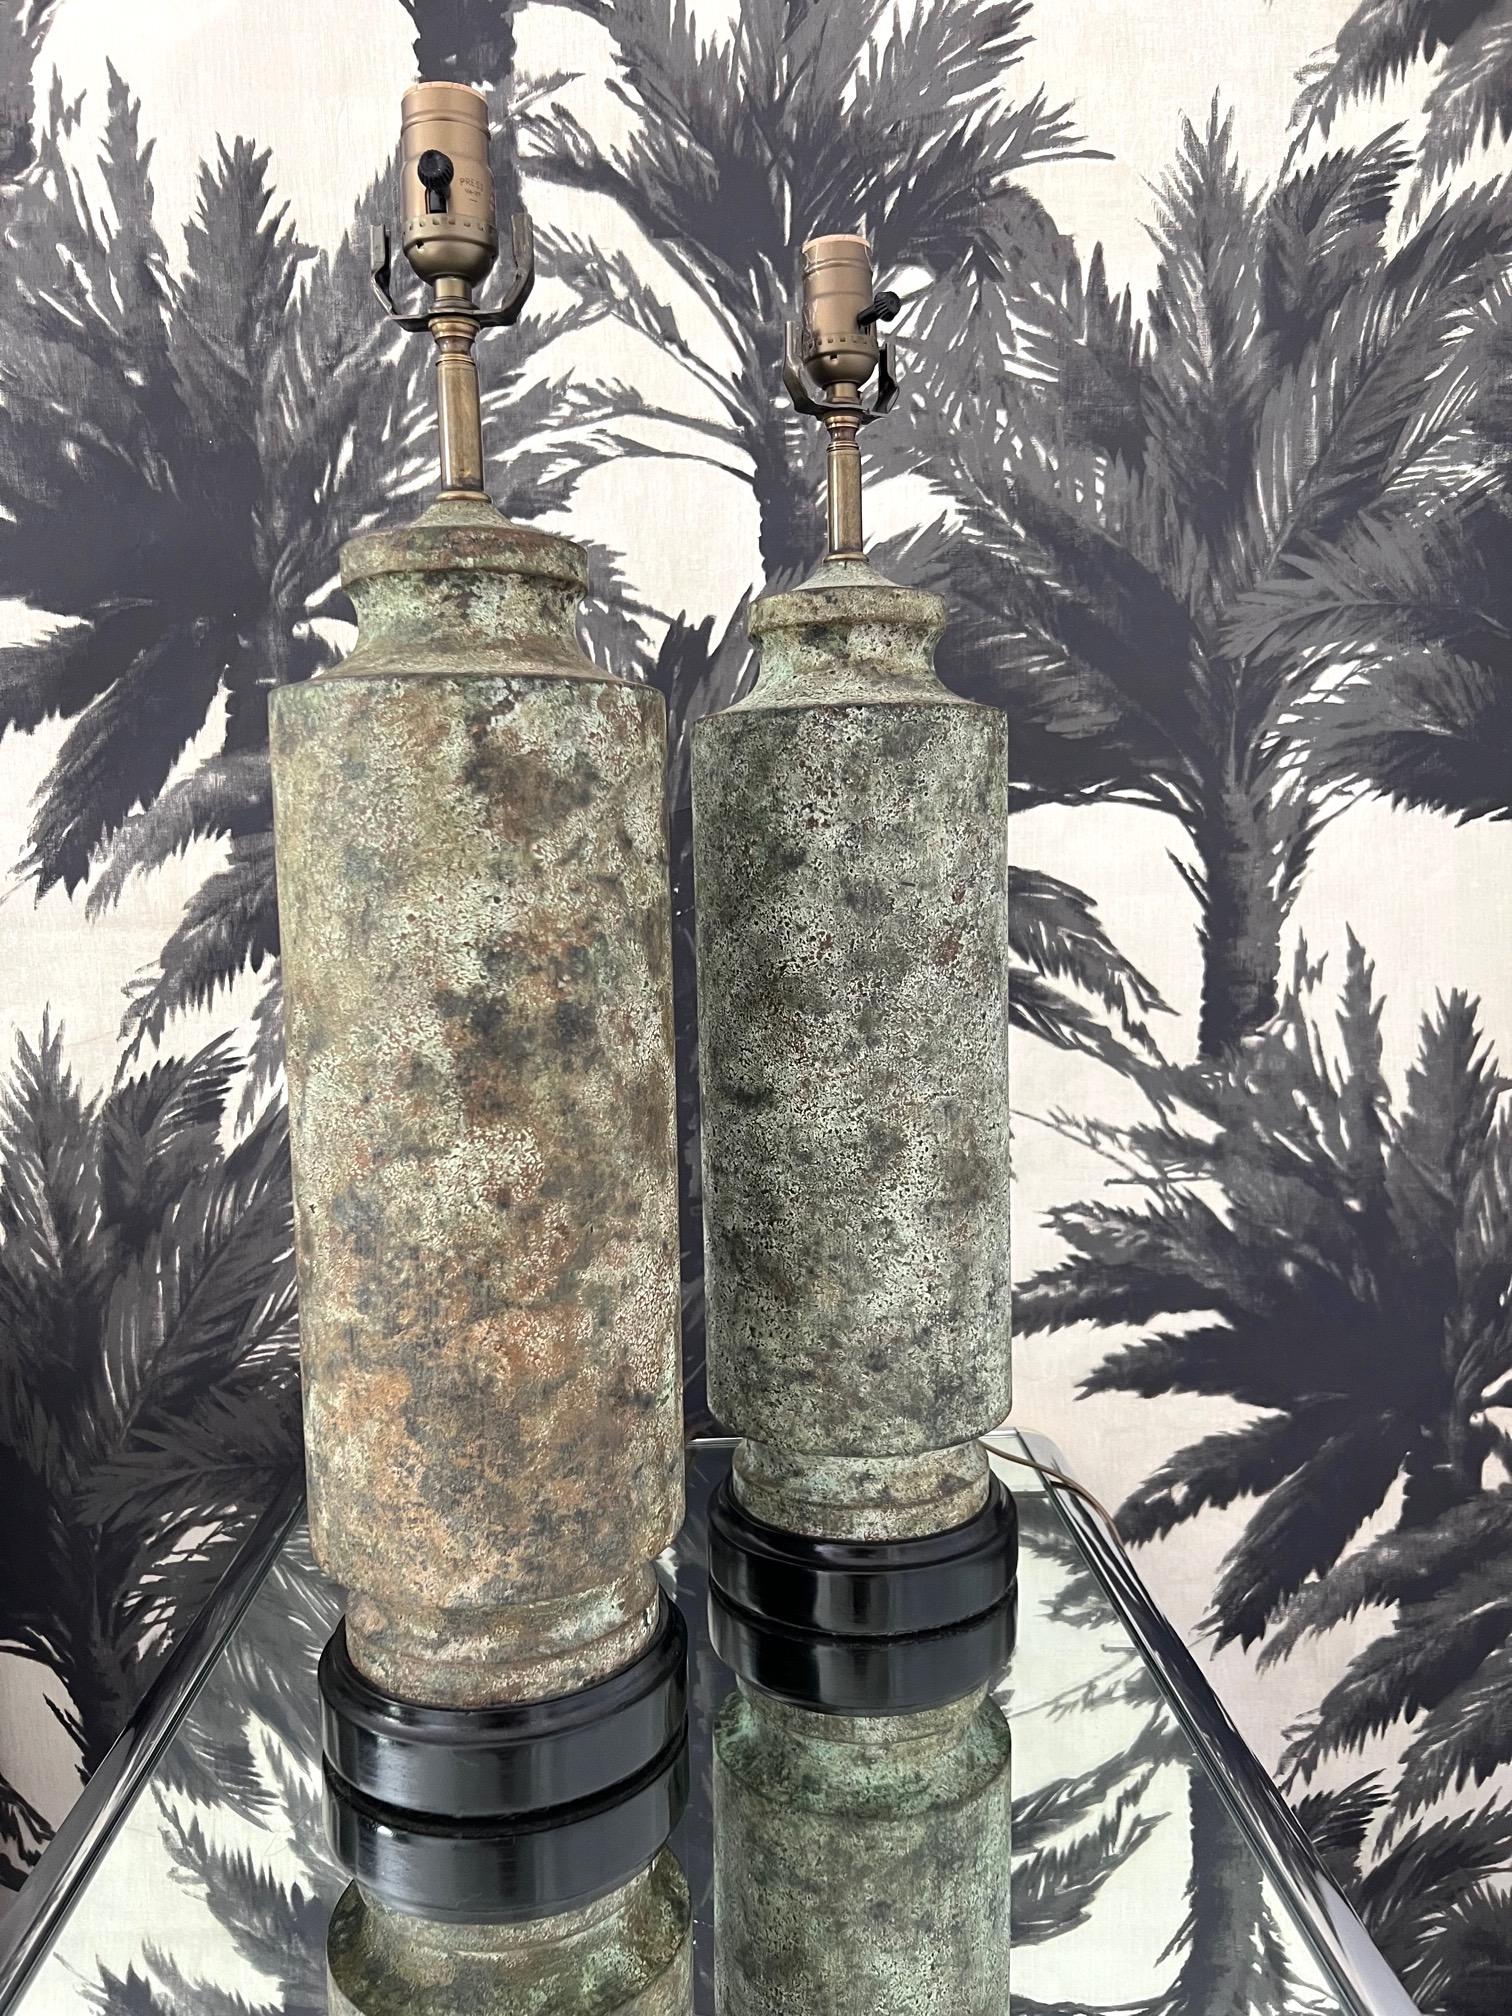 Pair of Pagoda Column Lamps with Verdigris Finish and Ebony Bases, 1960s For Sale 1